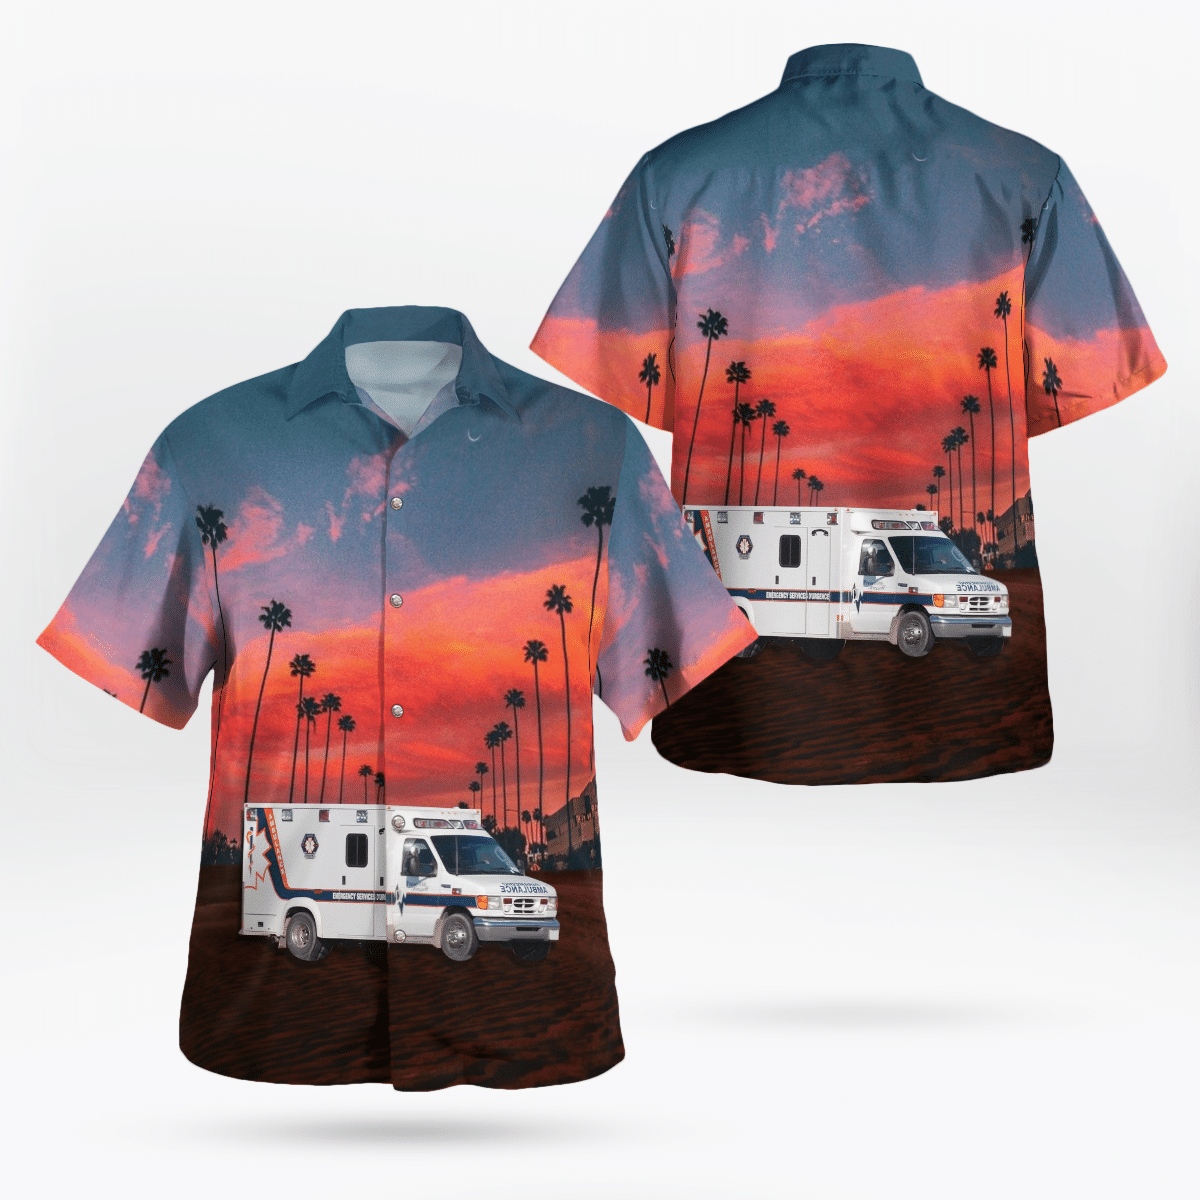 Shop now to find the perfect Hawaii Shirt for your hobby 16